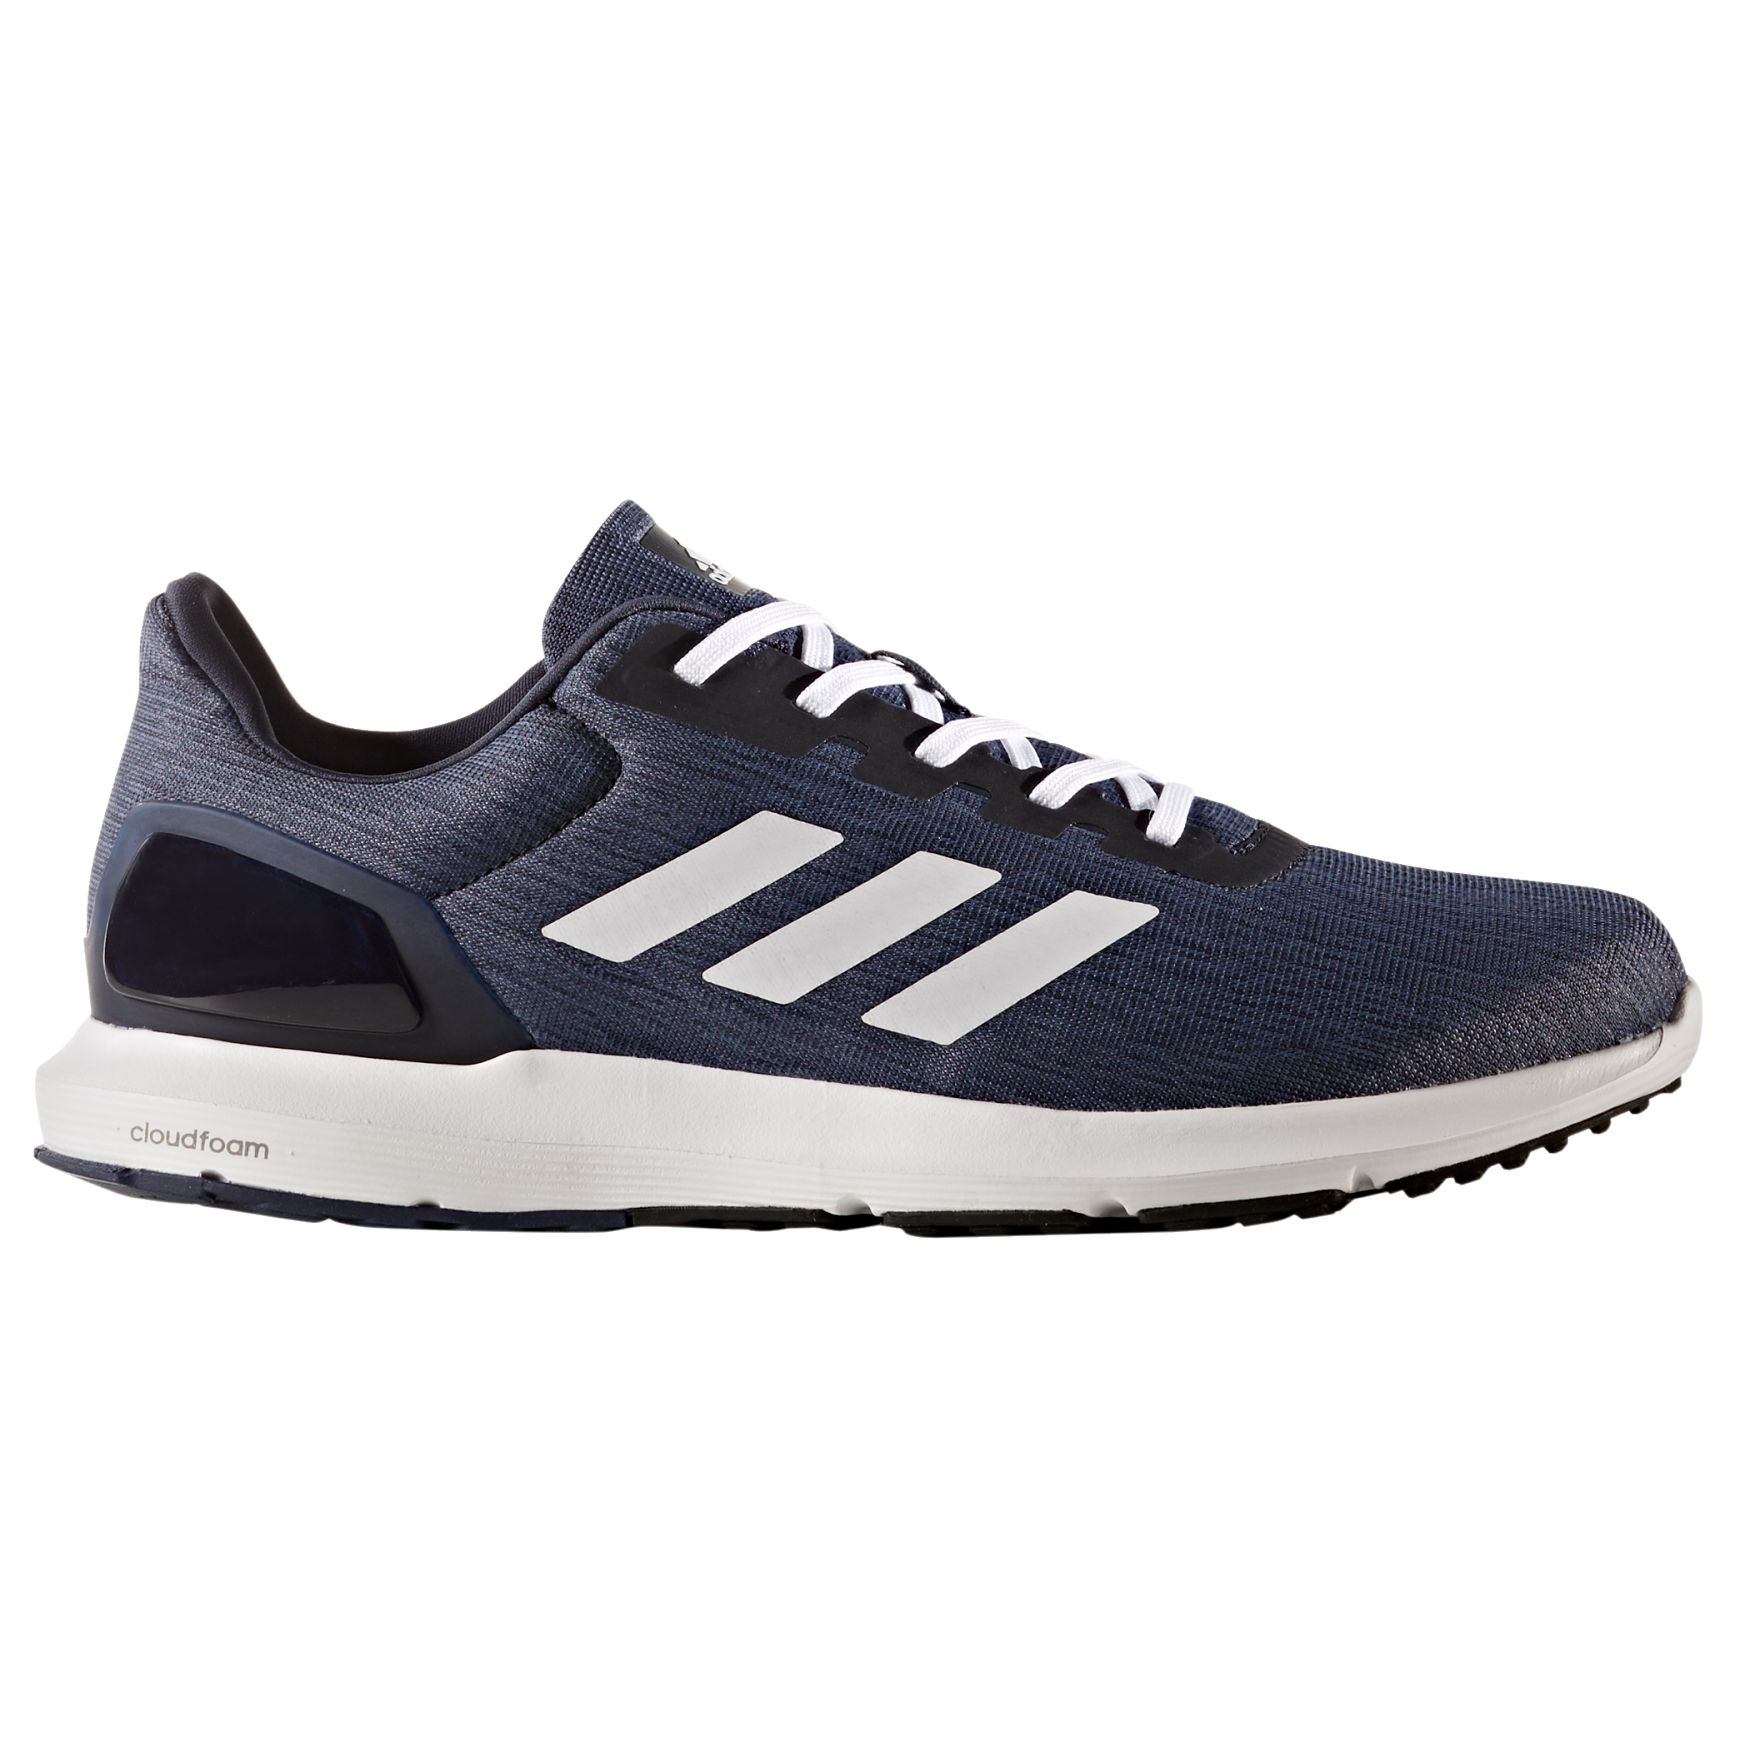 2.0 Running Shoes, Blue